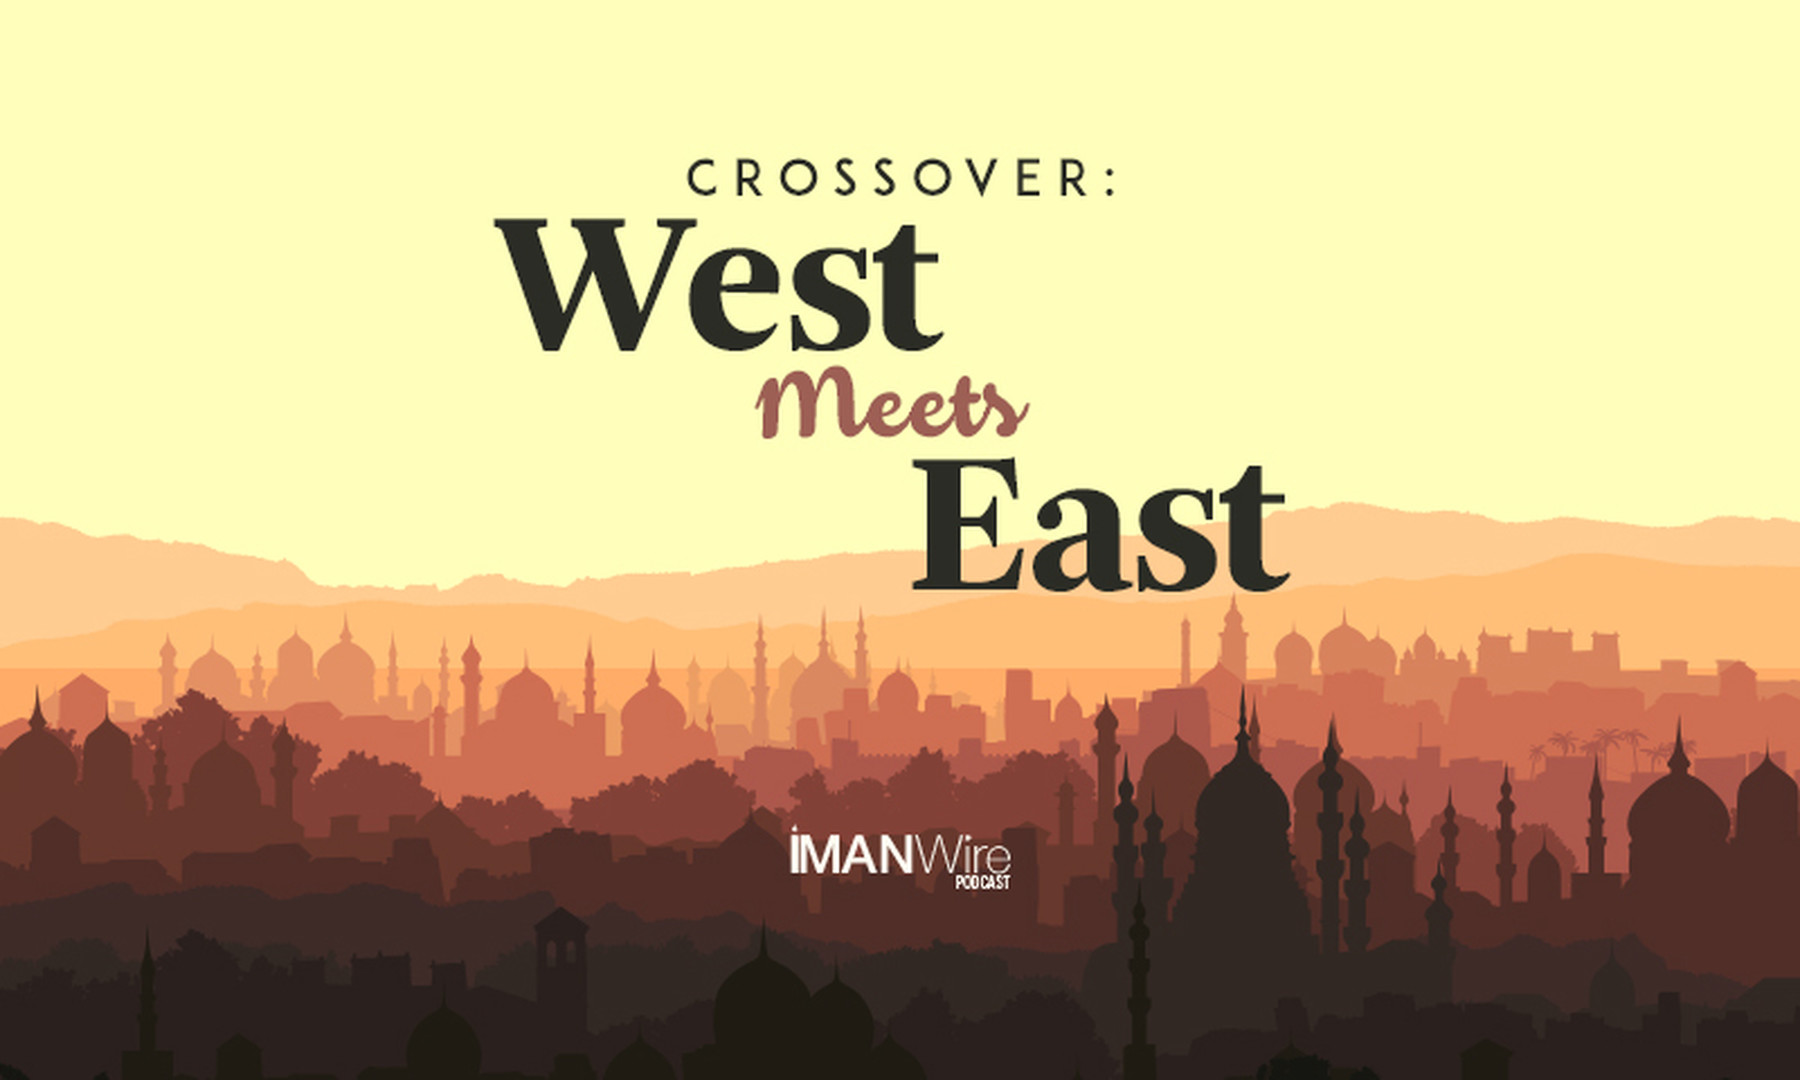 Crossover west meets east